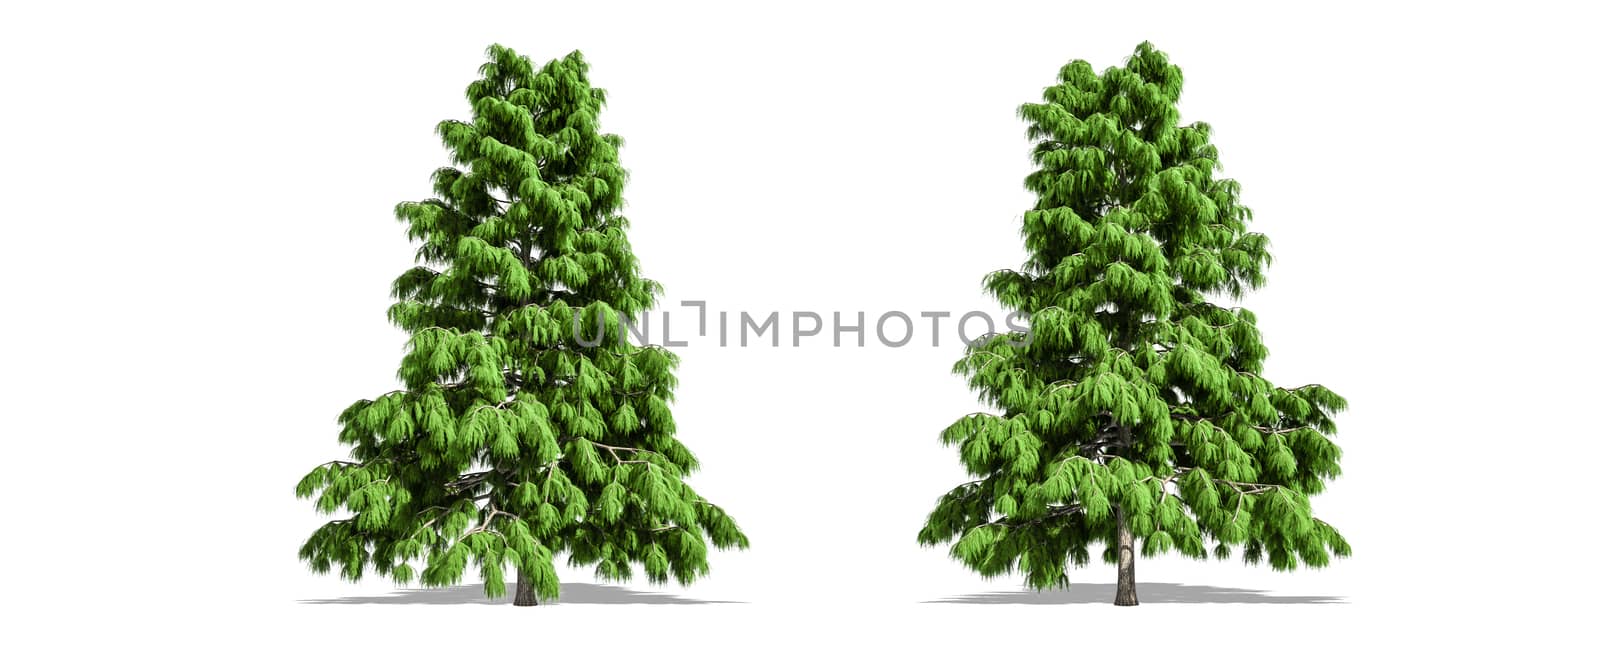 Beautiful Cedrus deodara tree isolated and cutting on a white background with clipping path. by anotestocker